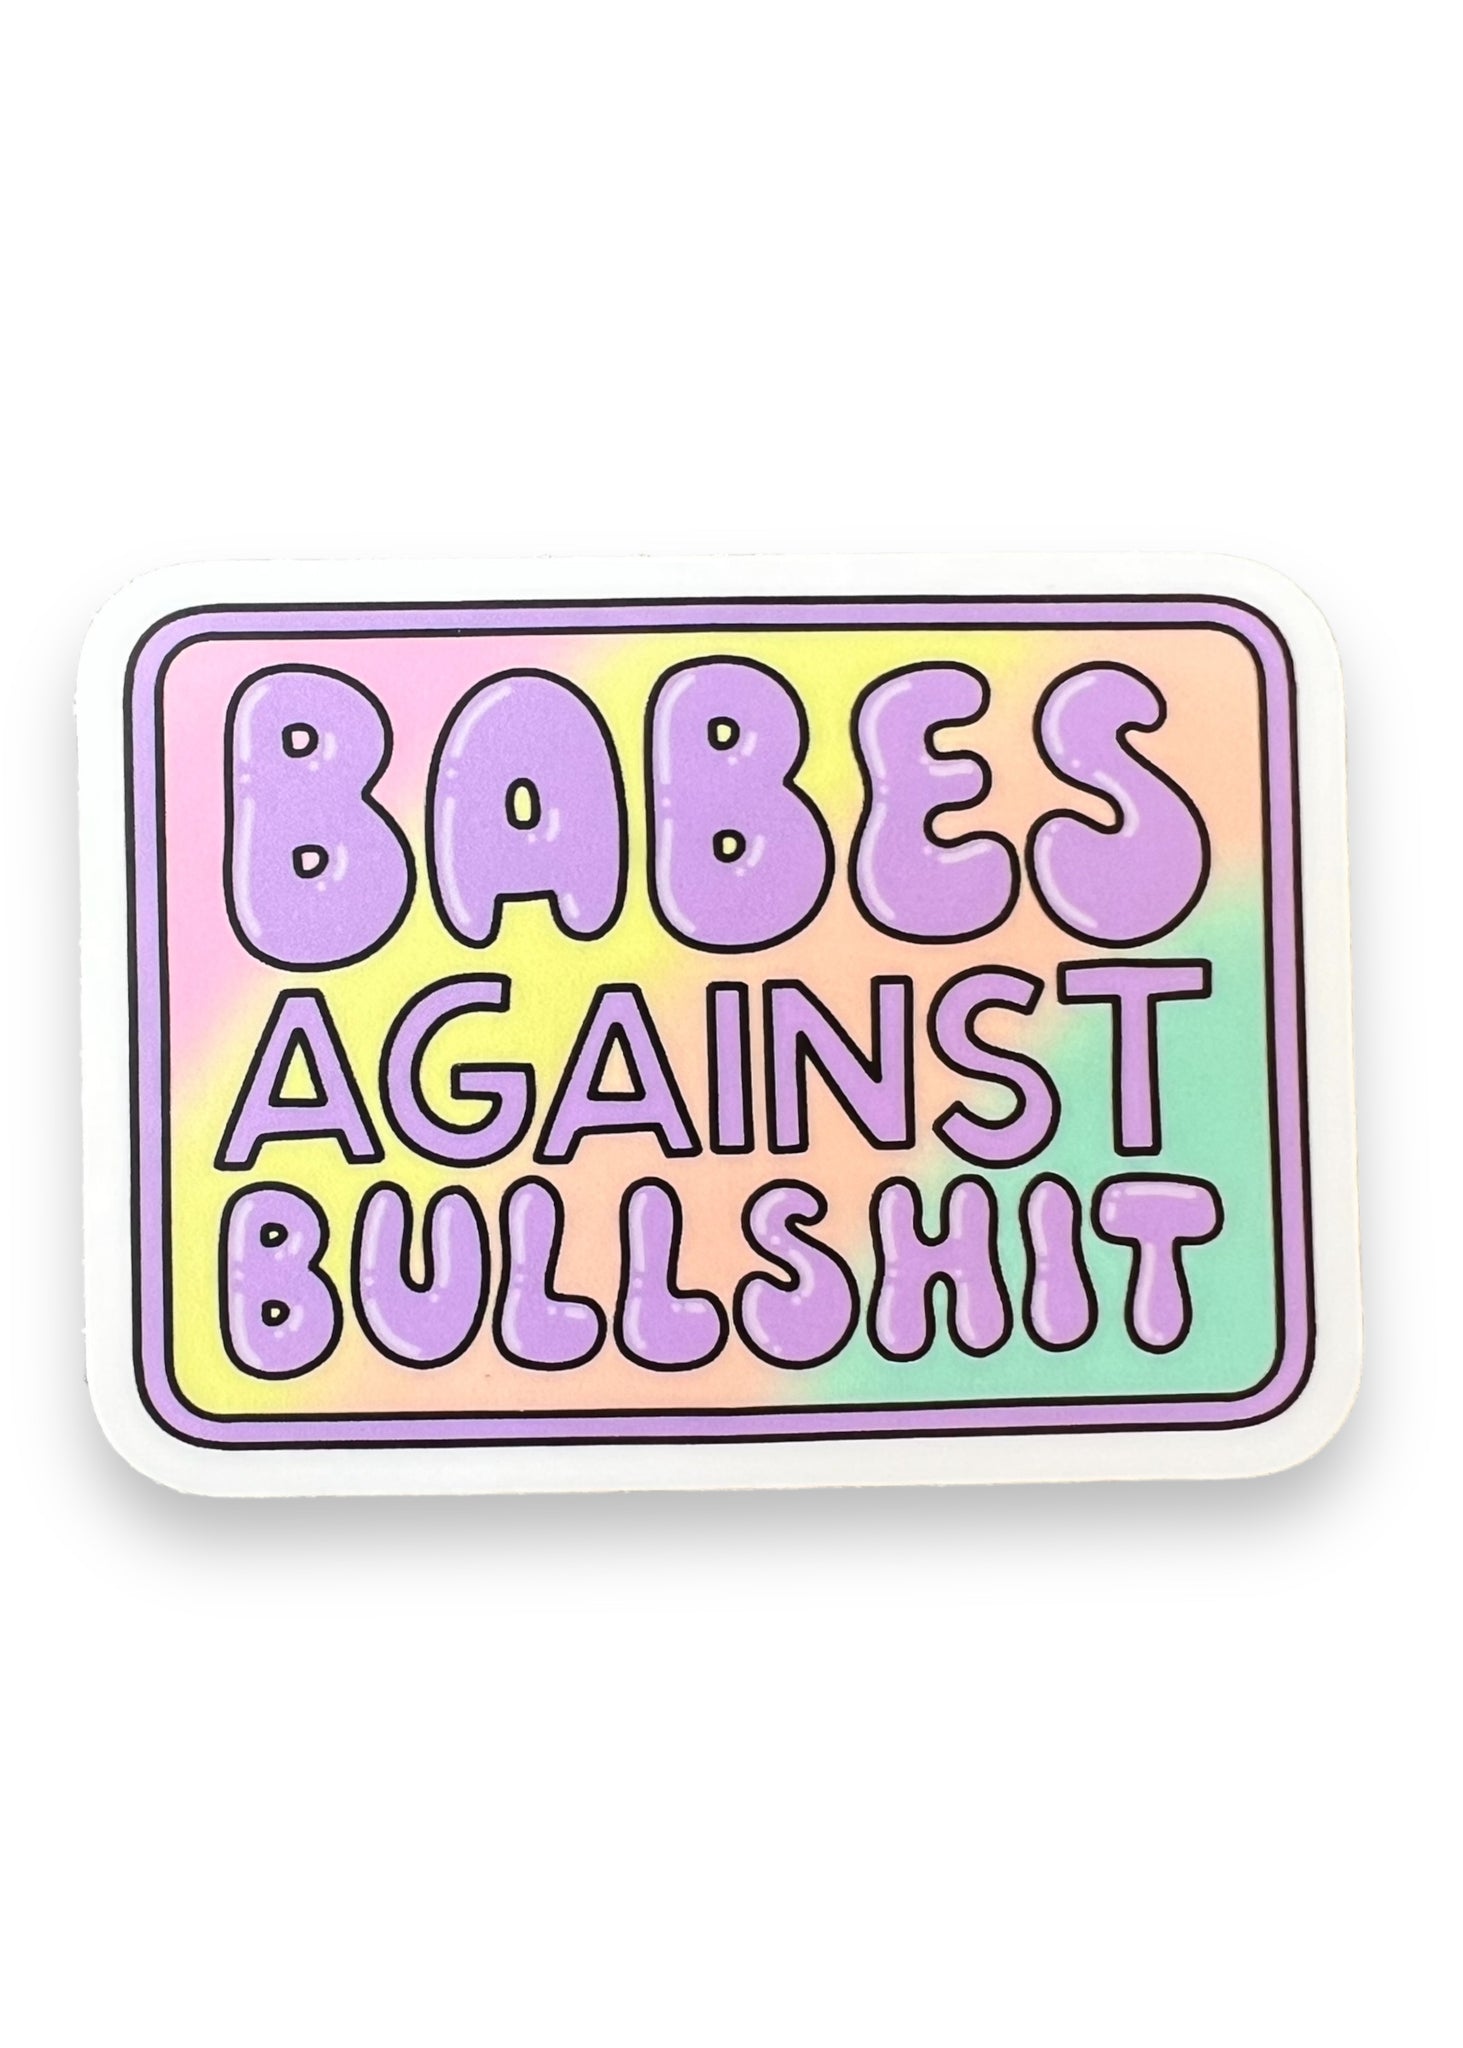 Babes Against Bullshit Sticker by Big Moods Sold by Le Monkey House